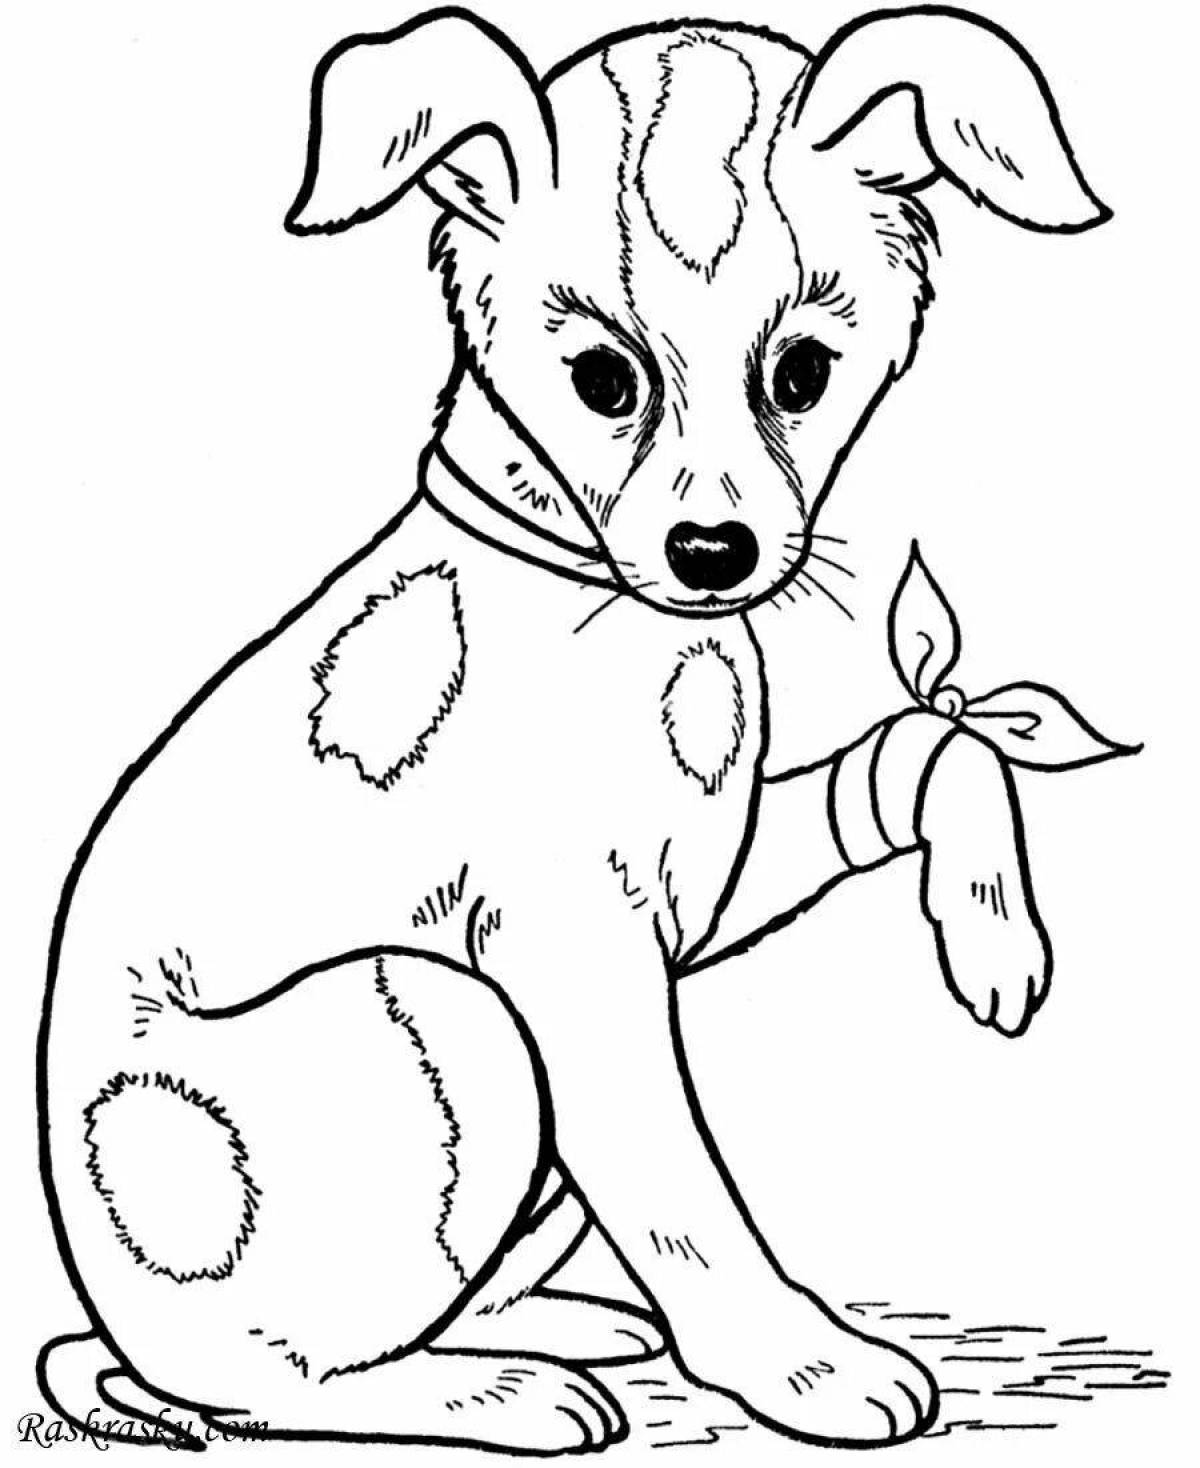 Live coloring of a dog for children